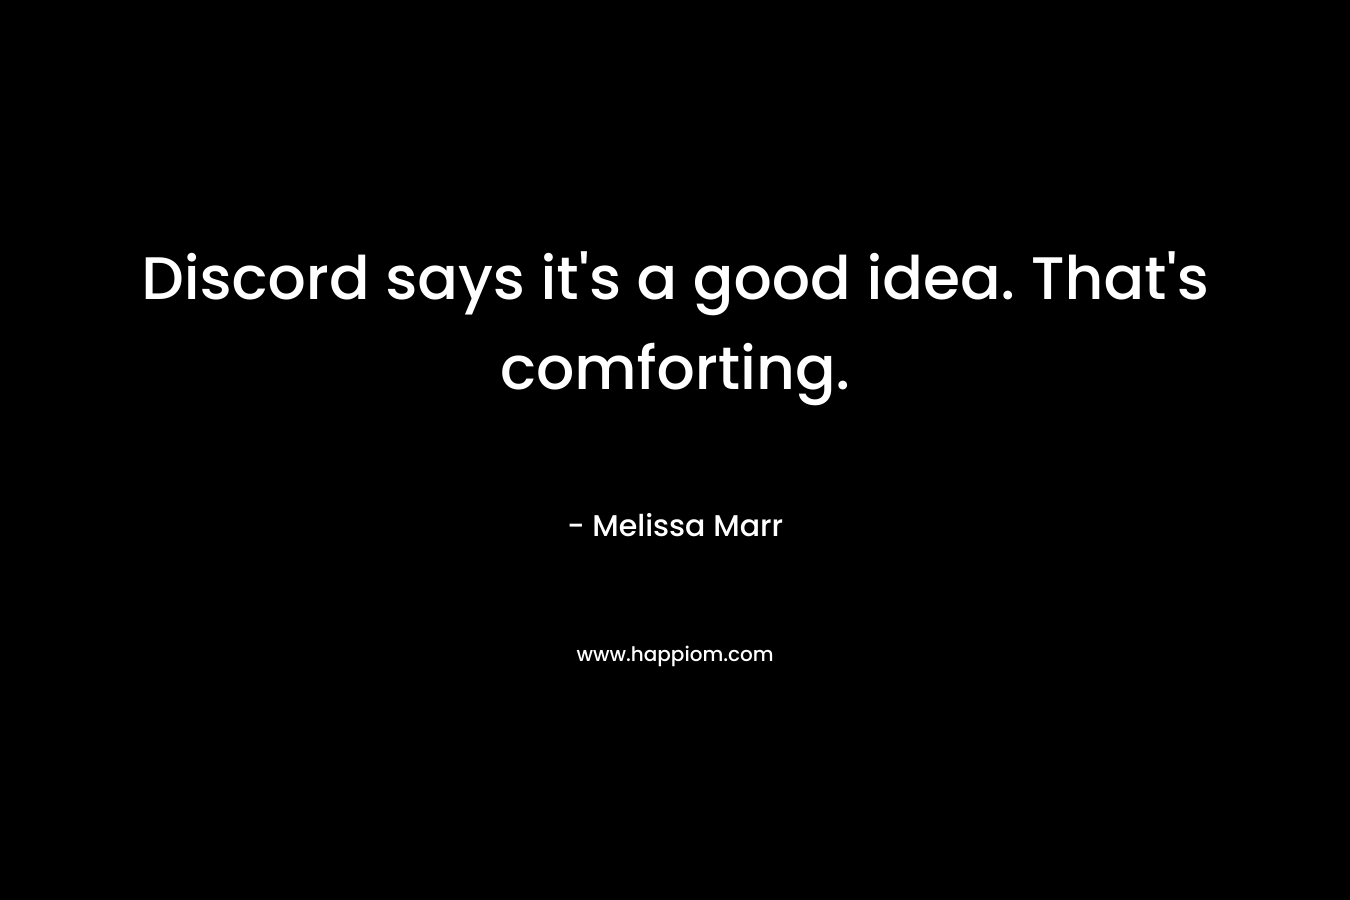 Discord says it’s a good idea. That’s comforting. – Melissa Marr